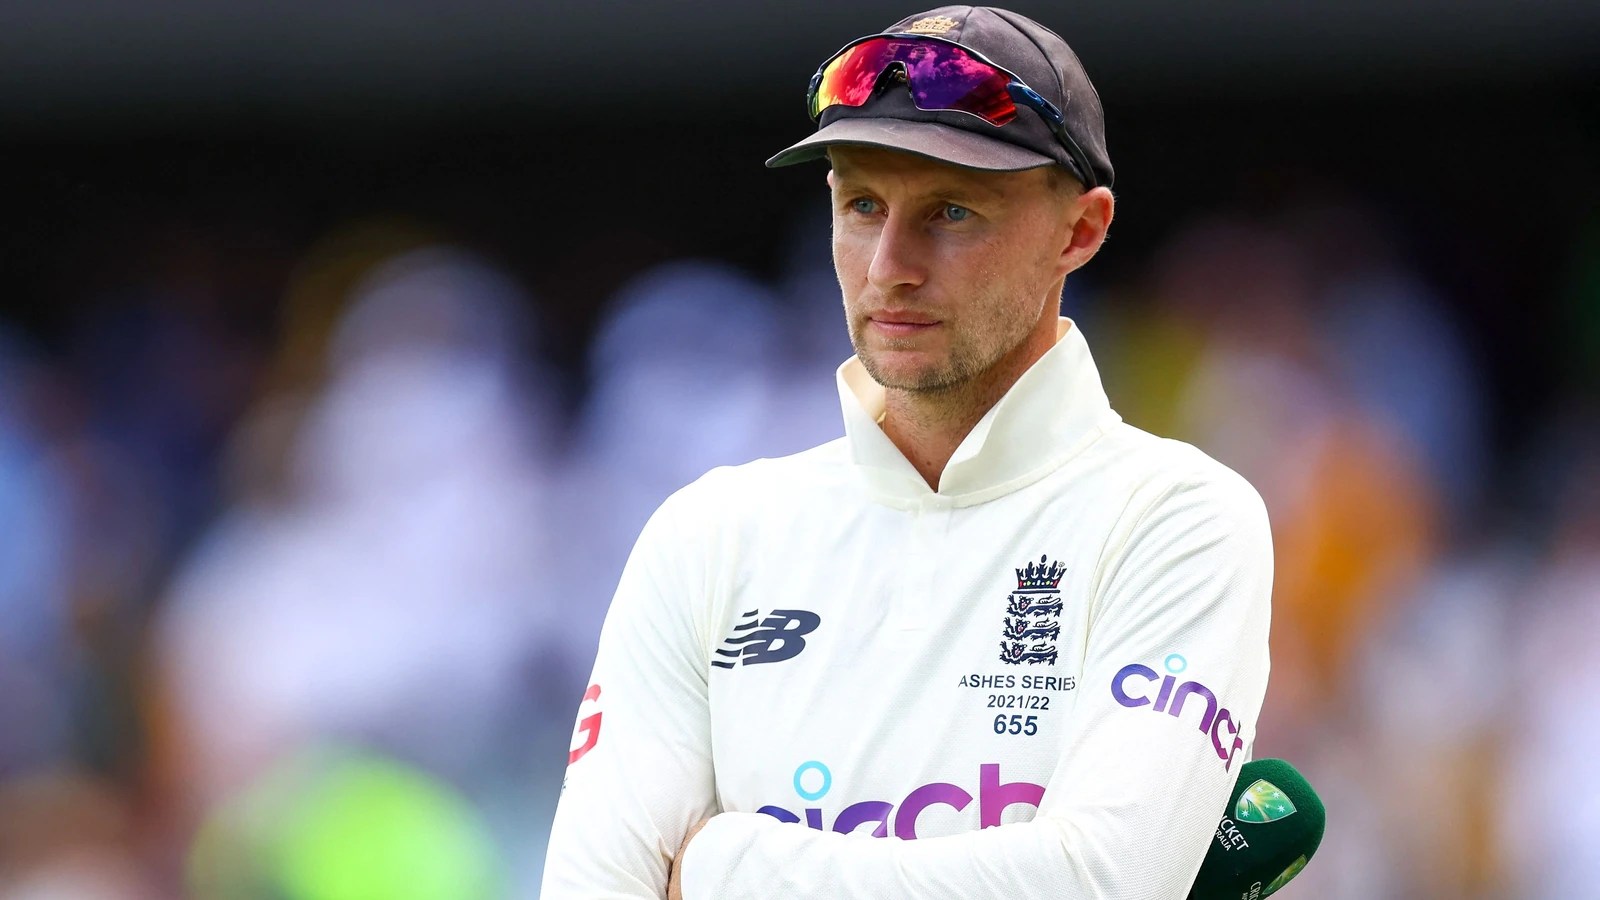 ILT20 2023: Ex England captain Joe Root hoping for good ILT20, IPL 2023 show, says 'I want to develop my white ball game'